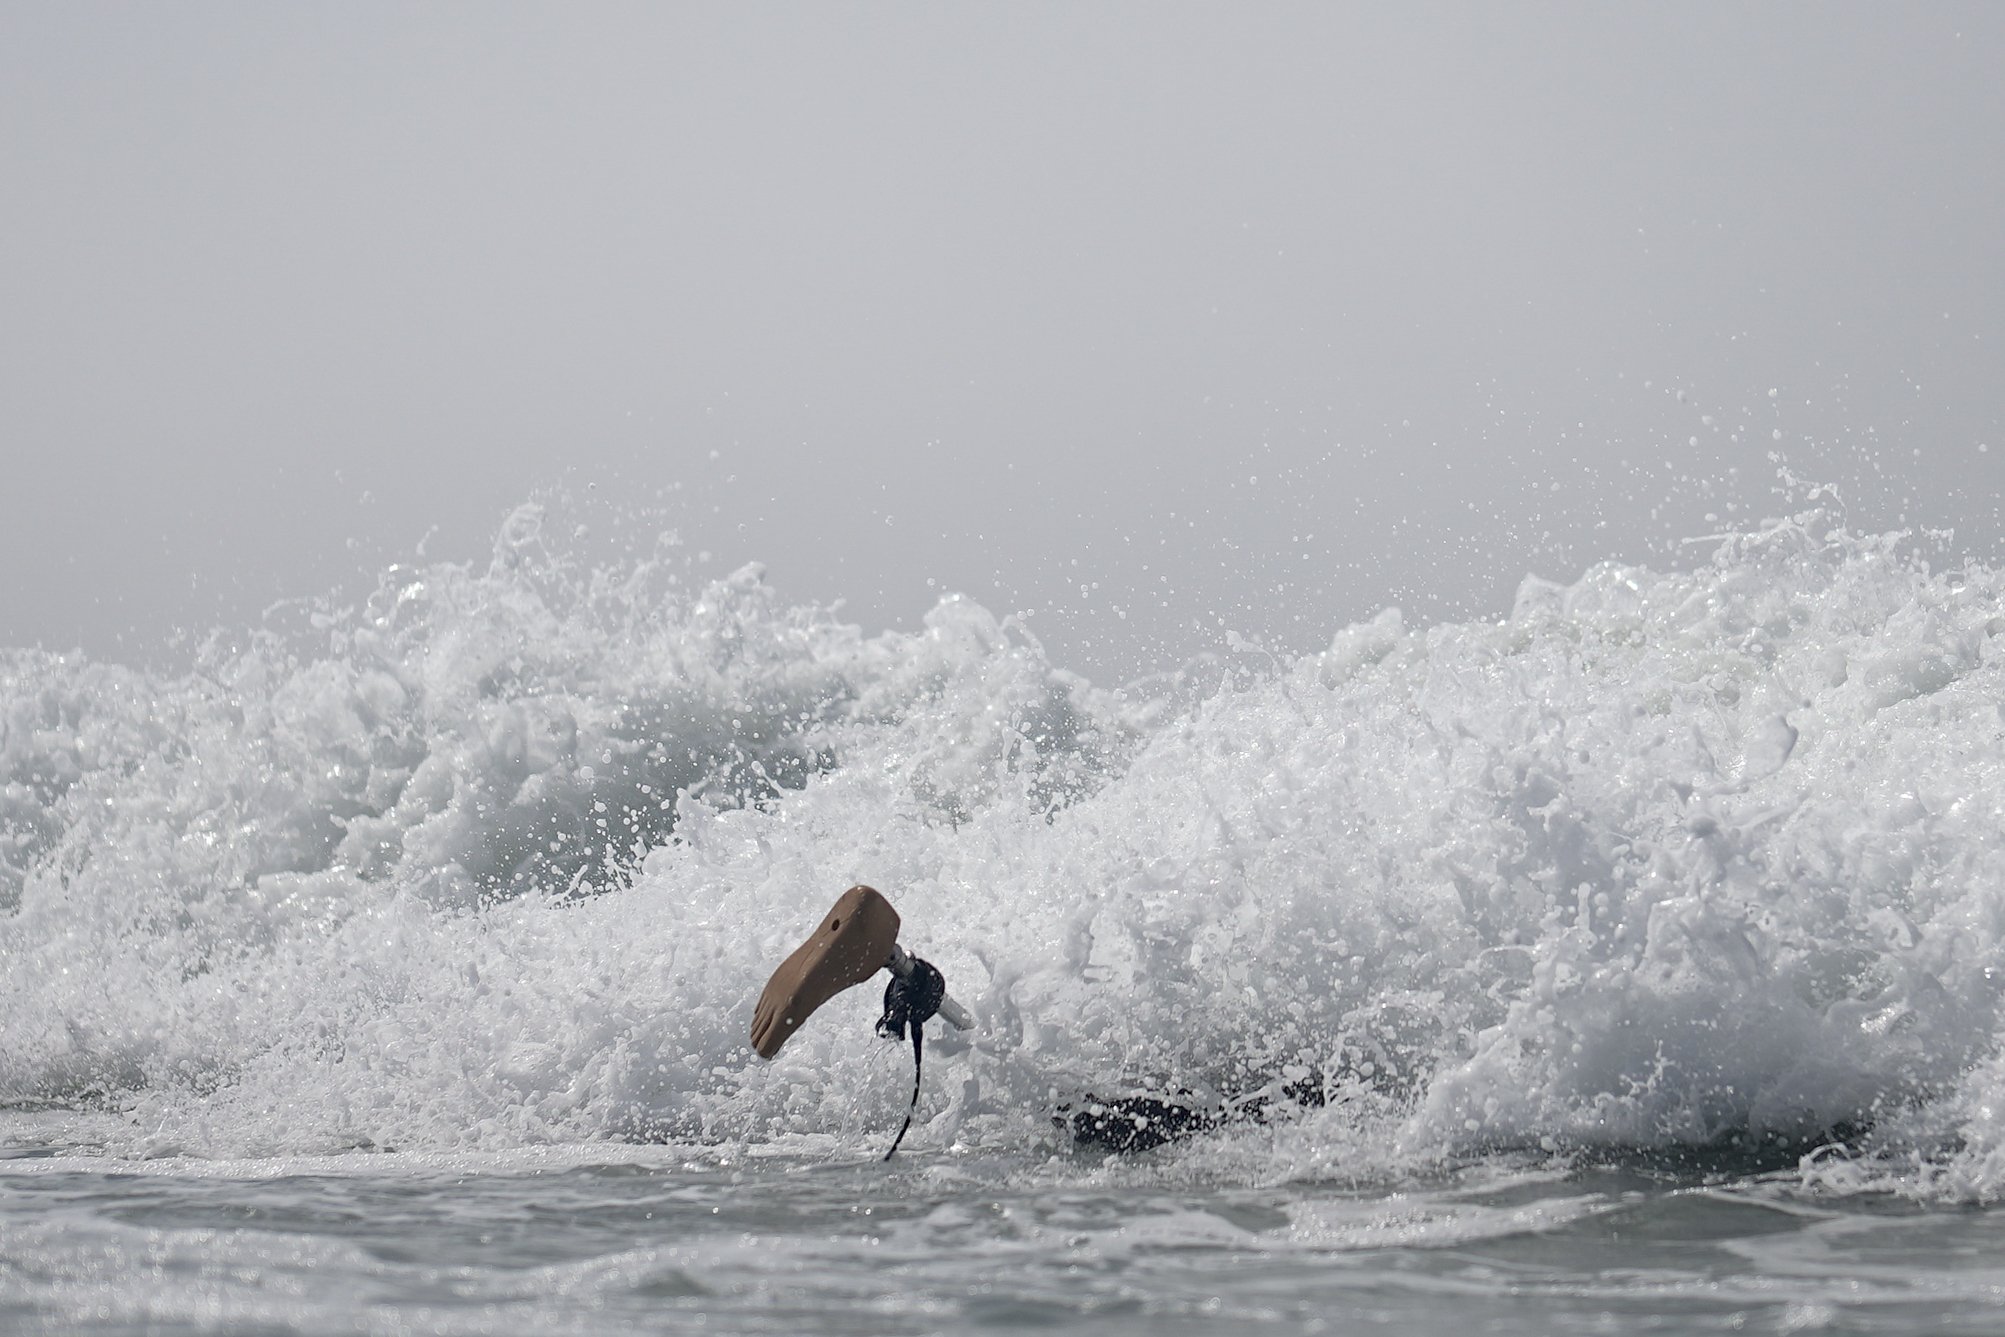  Chris Blowes, of Australia, duck-dives under a wave during the U.S. Open Adaptive Surfing Championships in Oceanside, Calif., on Sept. 8, 2023. More than 100 athletes with disabilities from 17 countries competed in the event. (AP Photo/Gregory Bull)